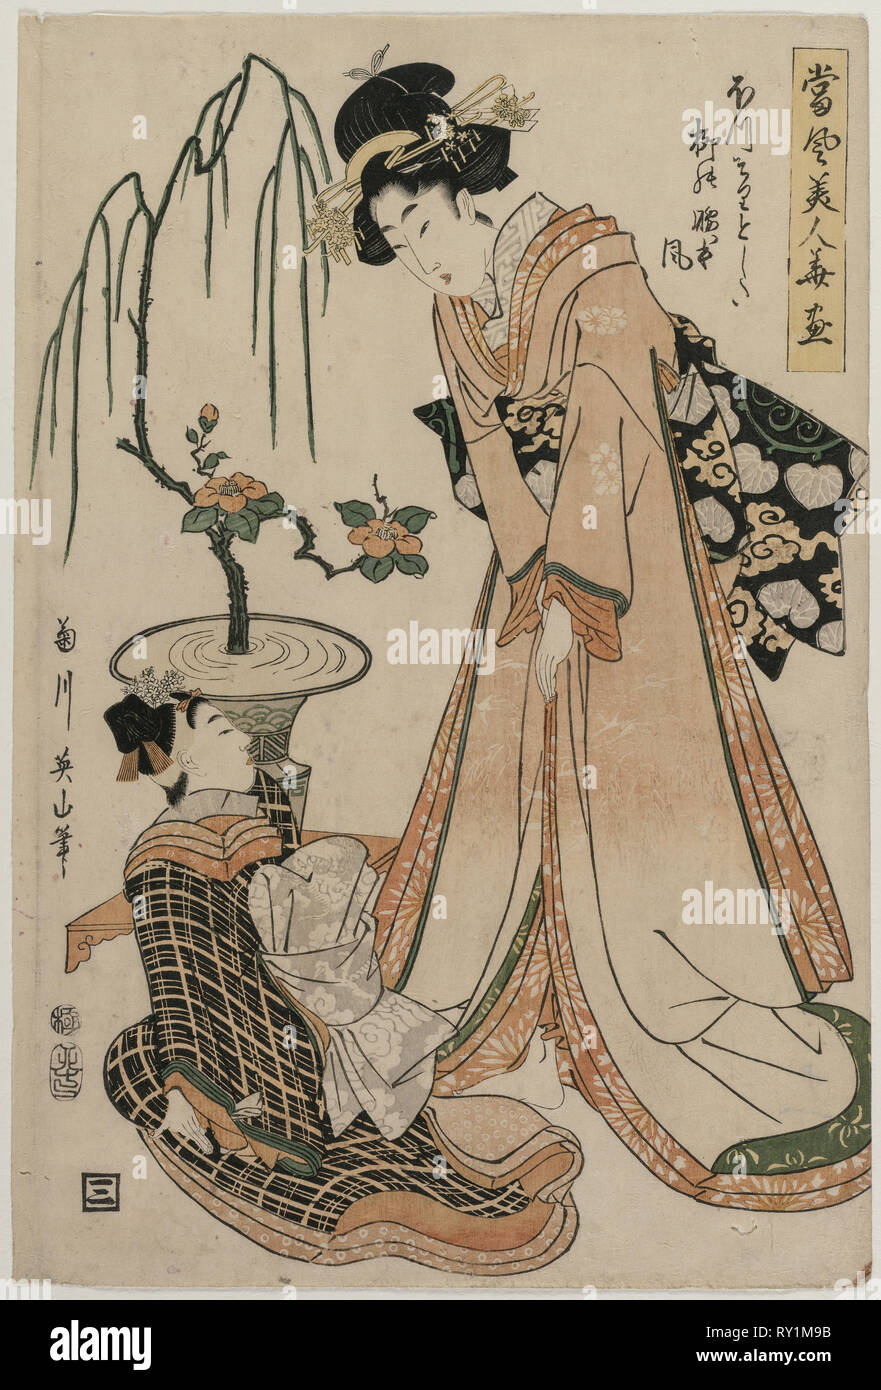 A Lady-in-Waiting with Waist as Slender as a Willow (From the series Flowers and Modern Beauties), 1807. Eizan Kikugawa (Japanese, 1787-1867). Color woodblock print; sheet: 38.1 x 25.4 cm (15 x 10 in Stock Photo